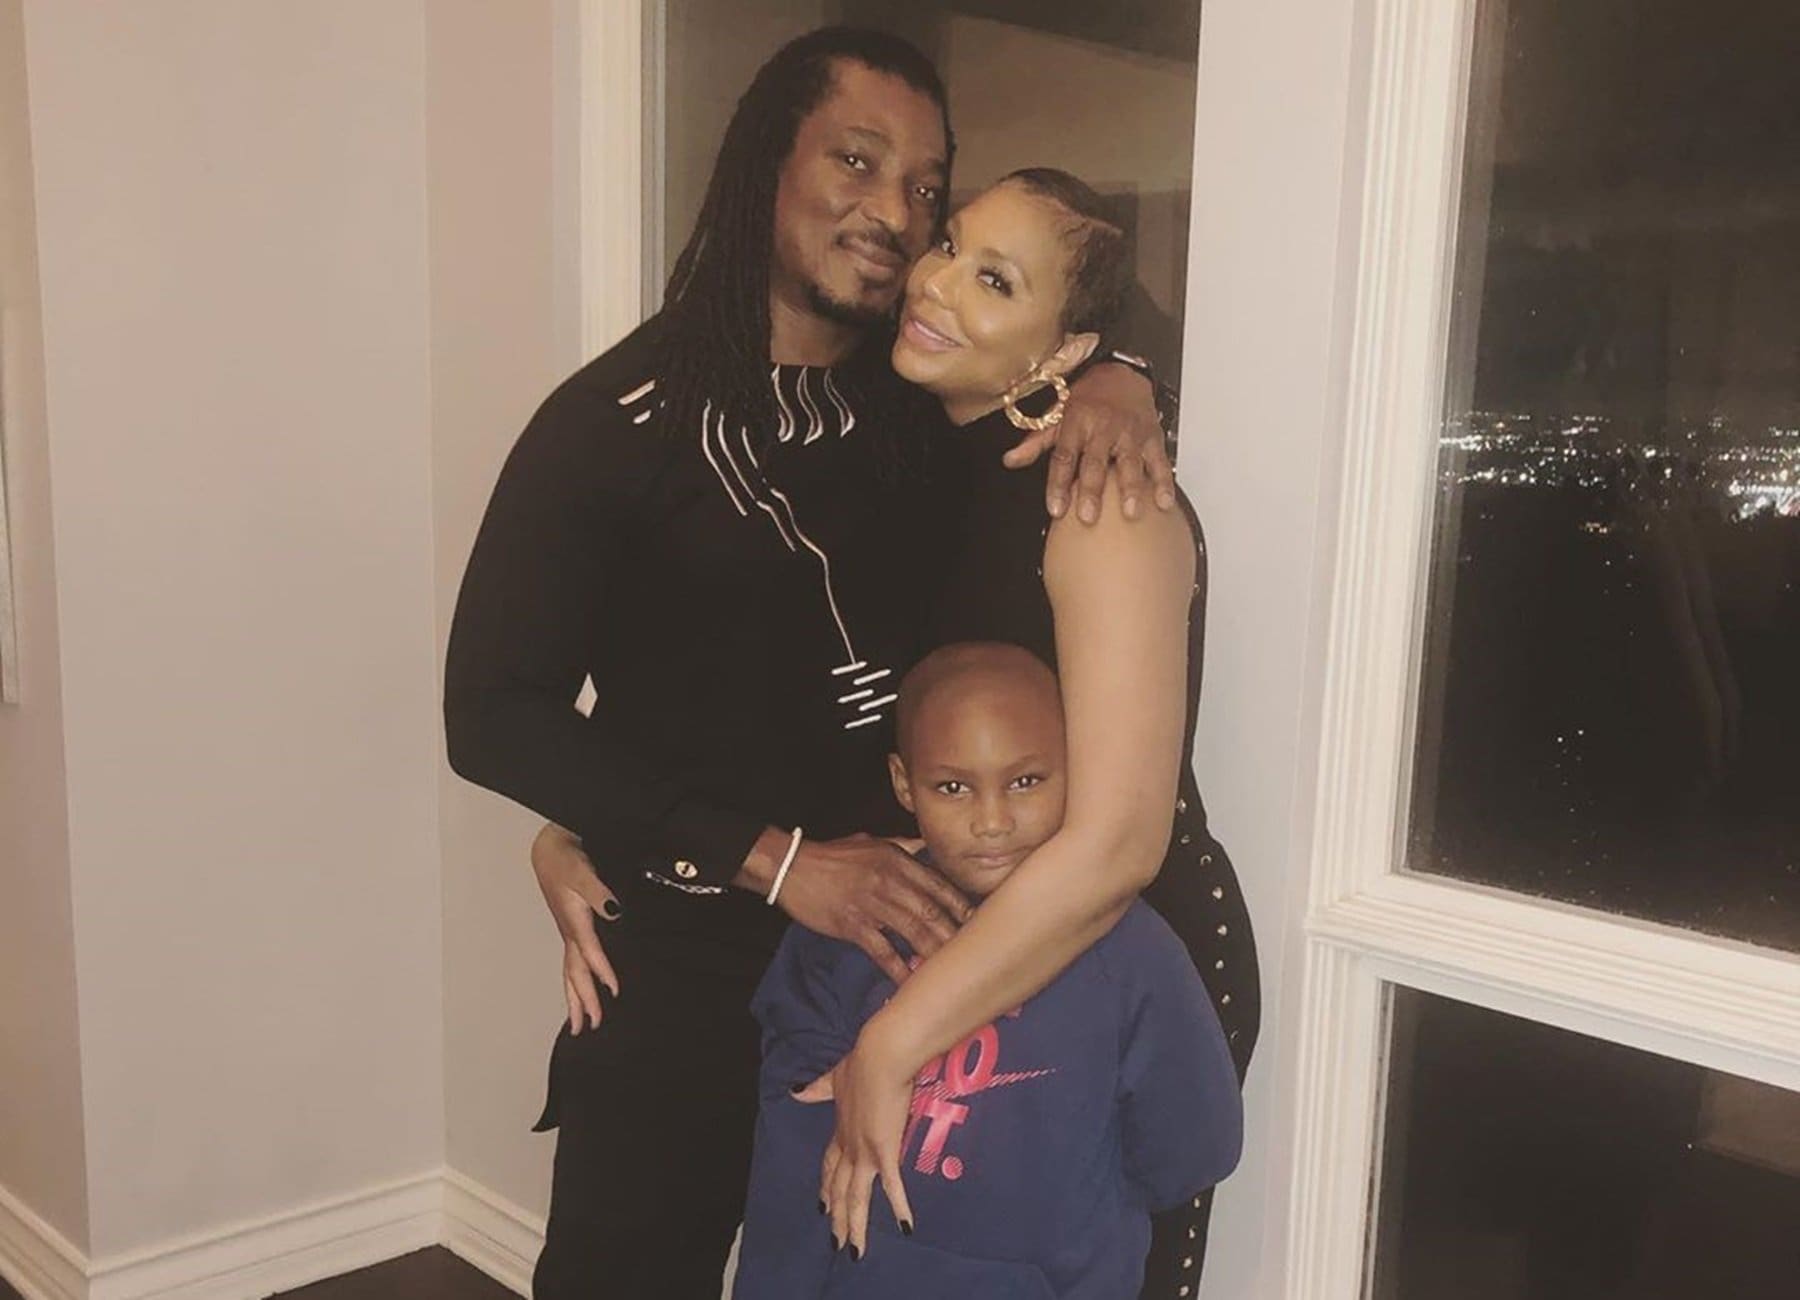 Tamar Braxton's BF, David Adefeso, Shares A Gorgeous Photo Of His Mother And Pens An Emotional Message For Her - People Are Blown Away By Her Youthful Look